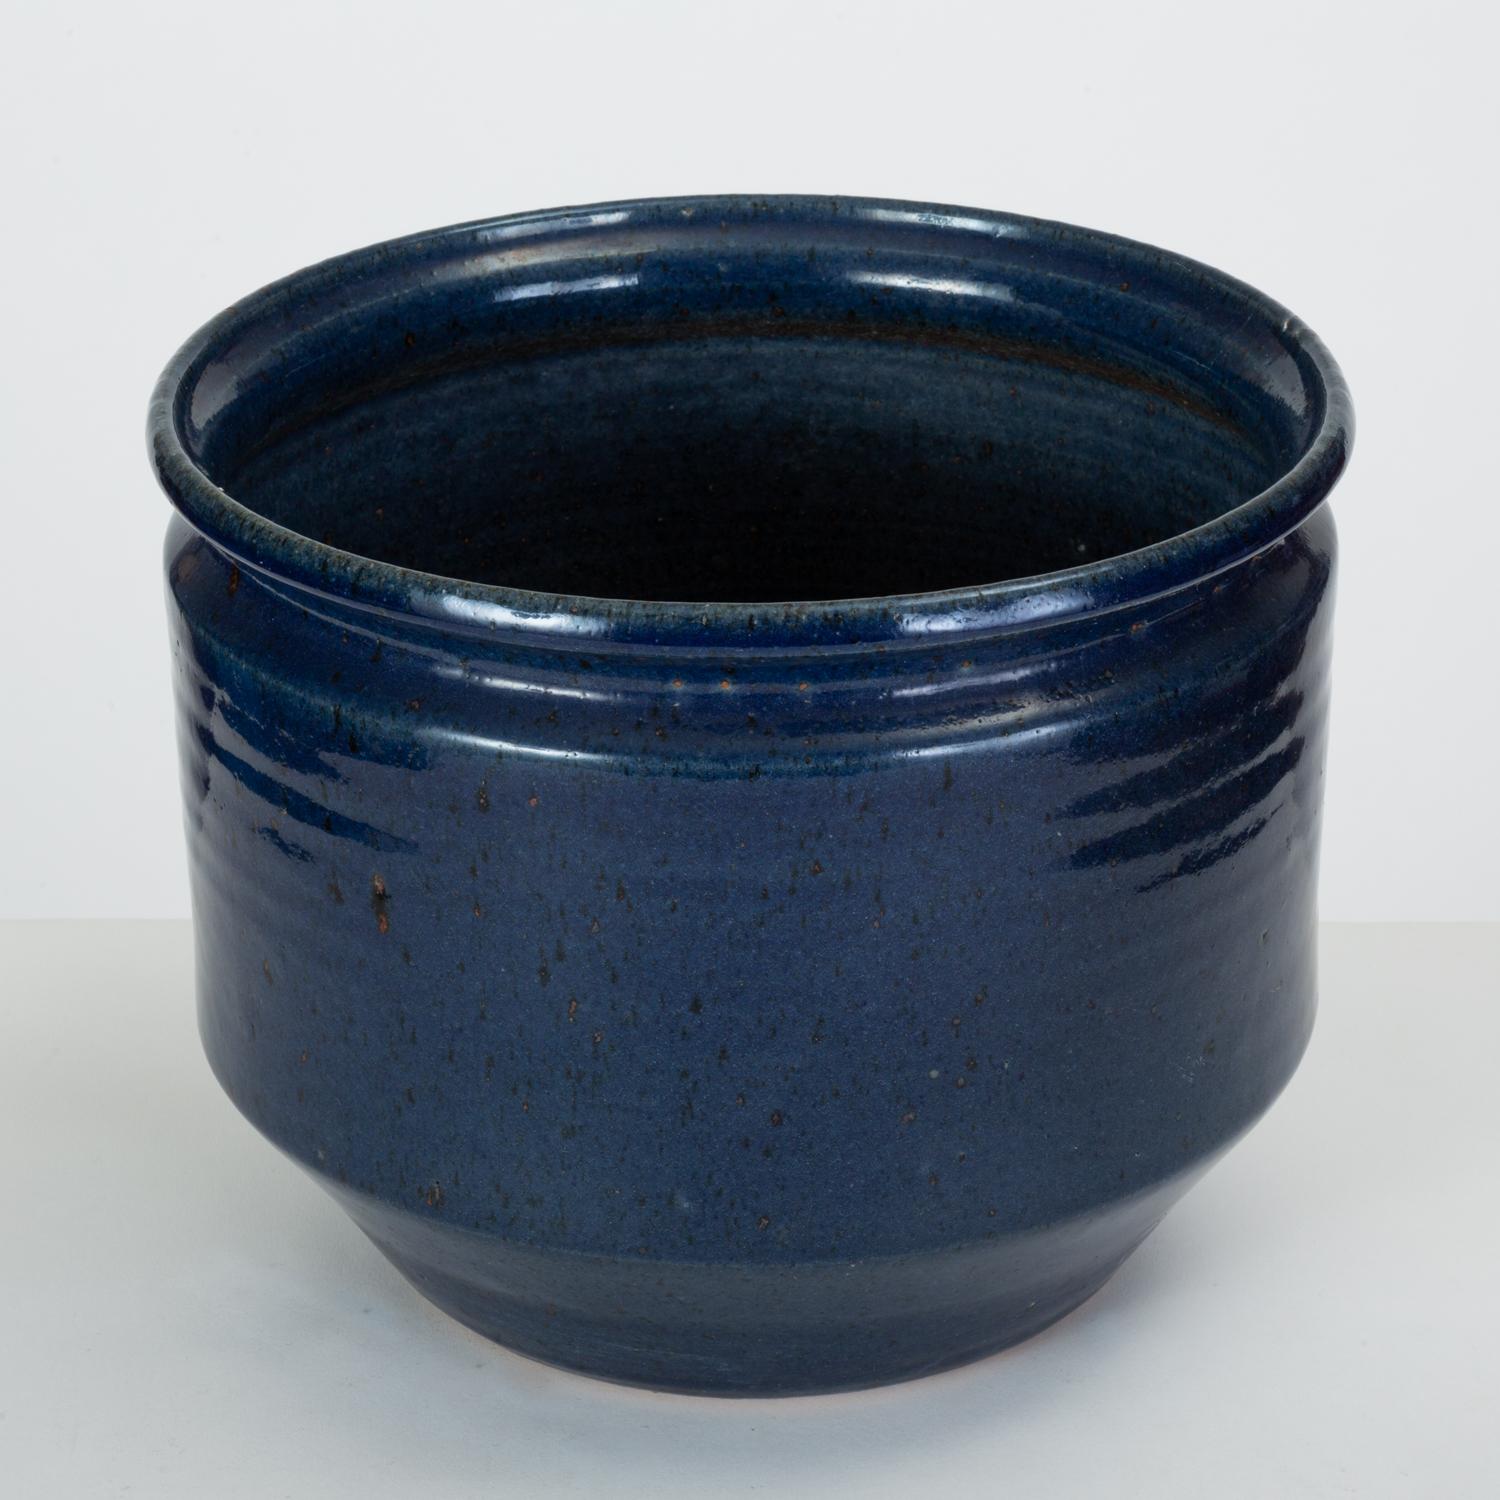 Pair of Blue-Glazed Earthgender Bowl Planters, David Cressey and Robert Maxwell (Steingut)